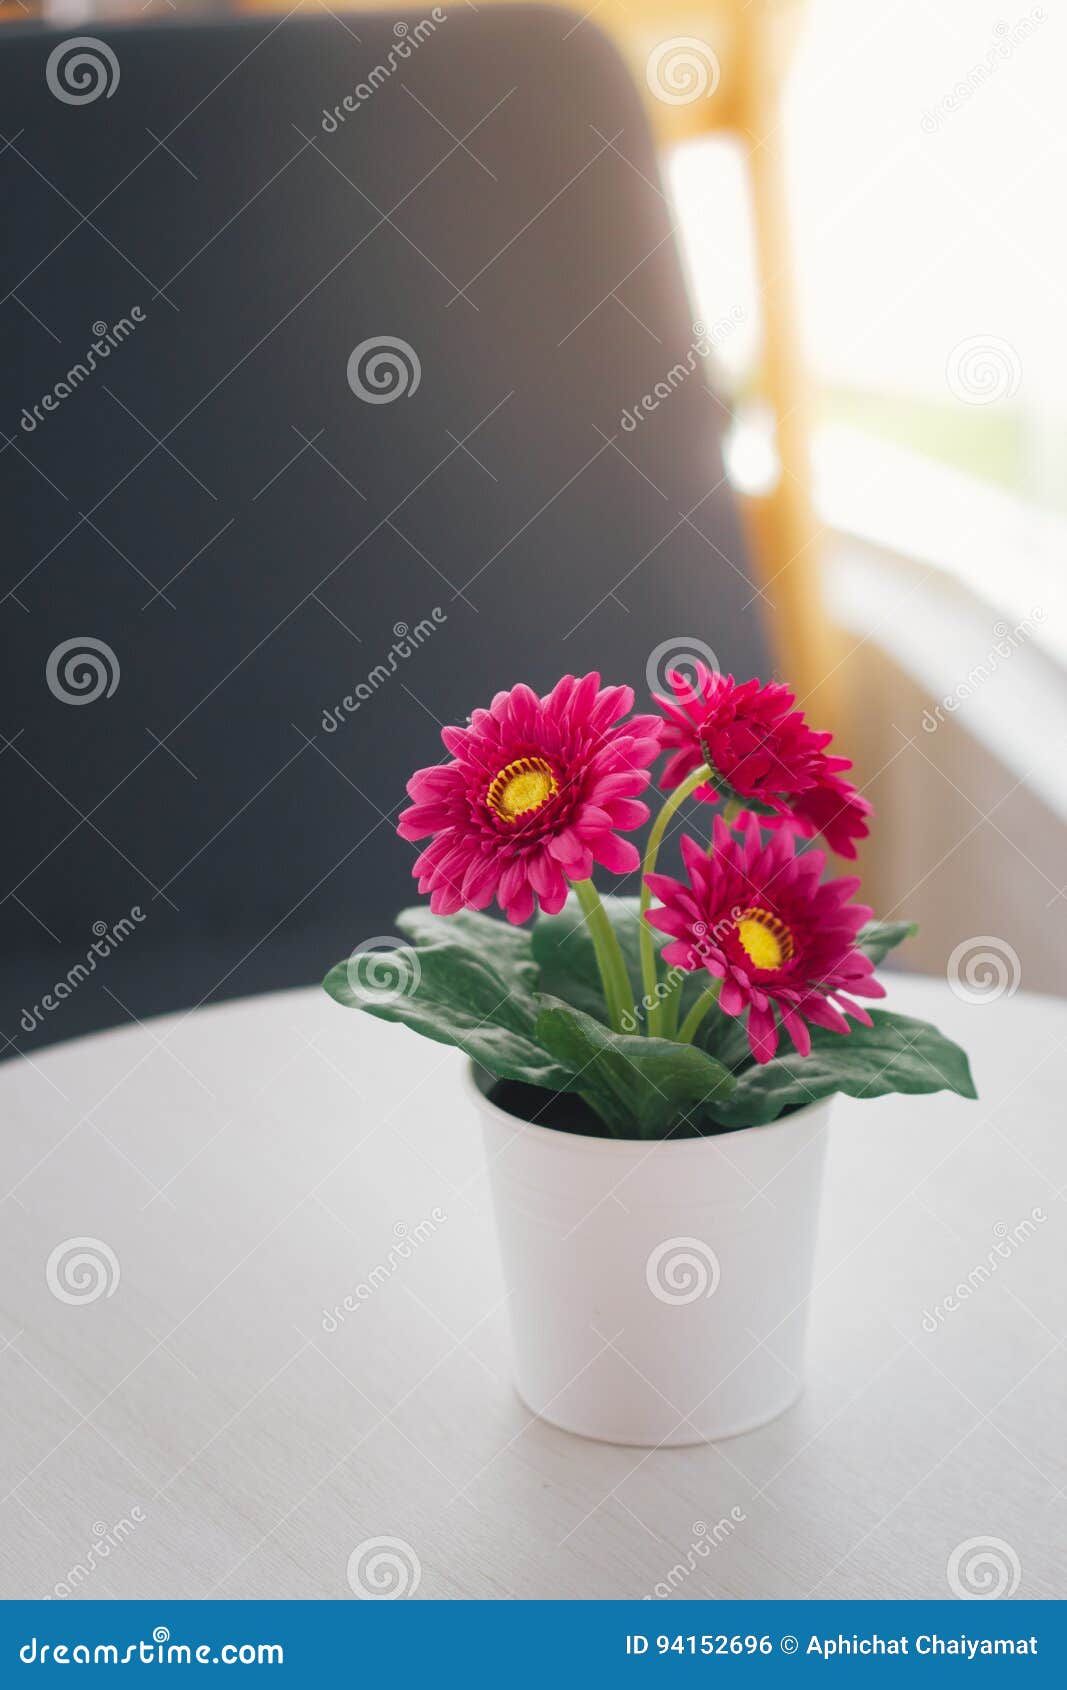 Colorful Decoration Artificial Flower In The Vase At Home Stock